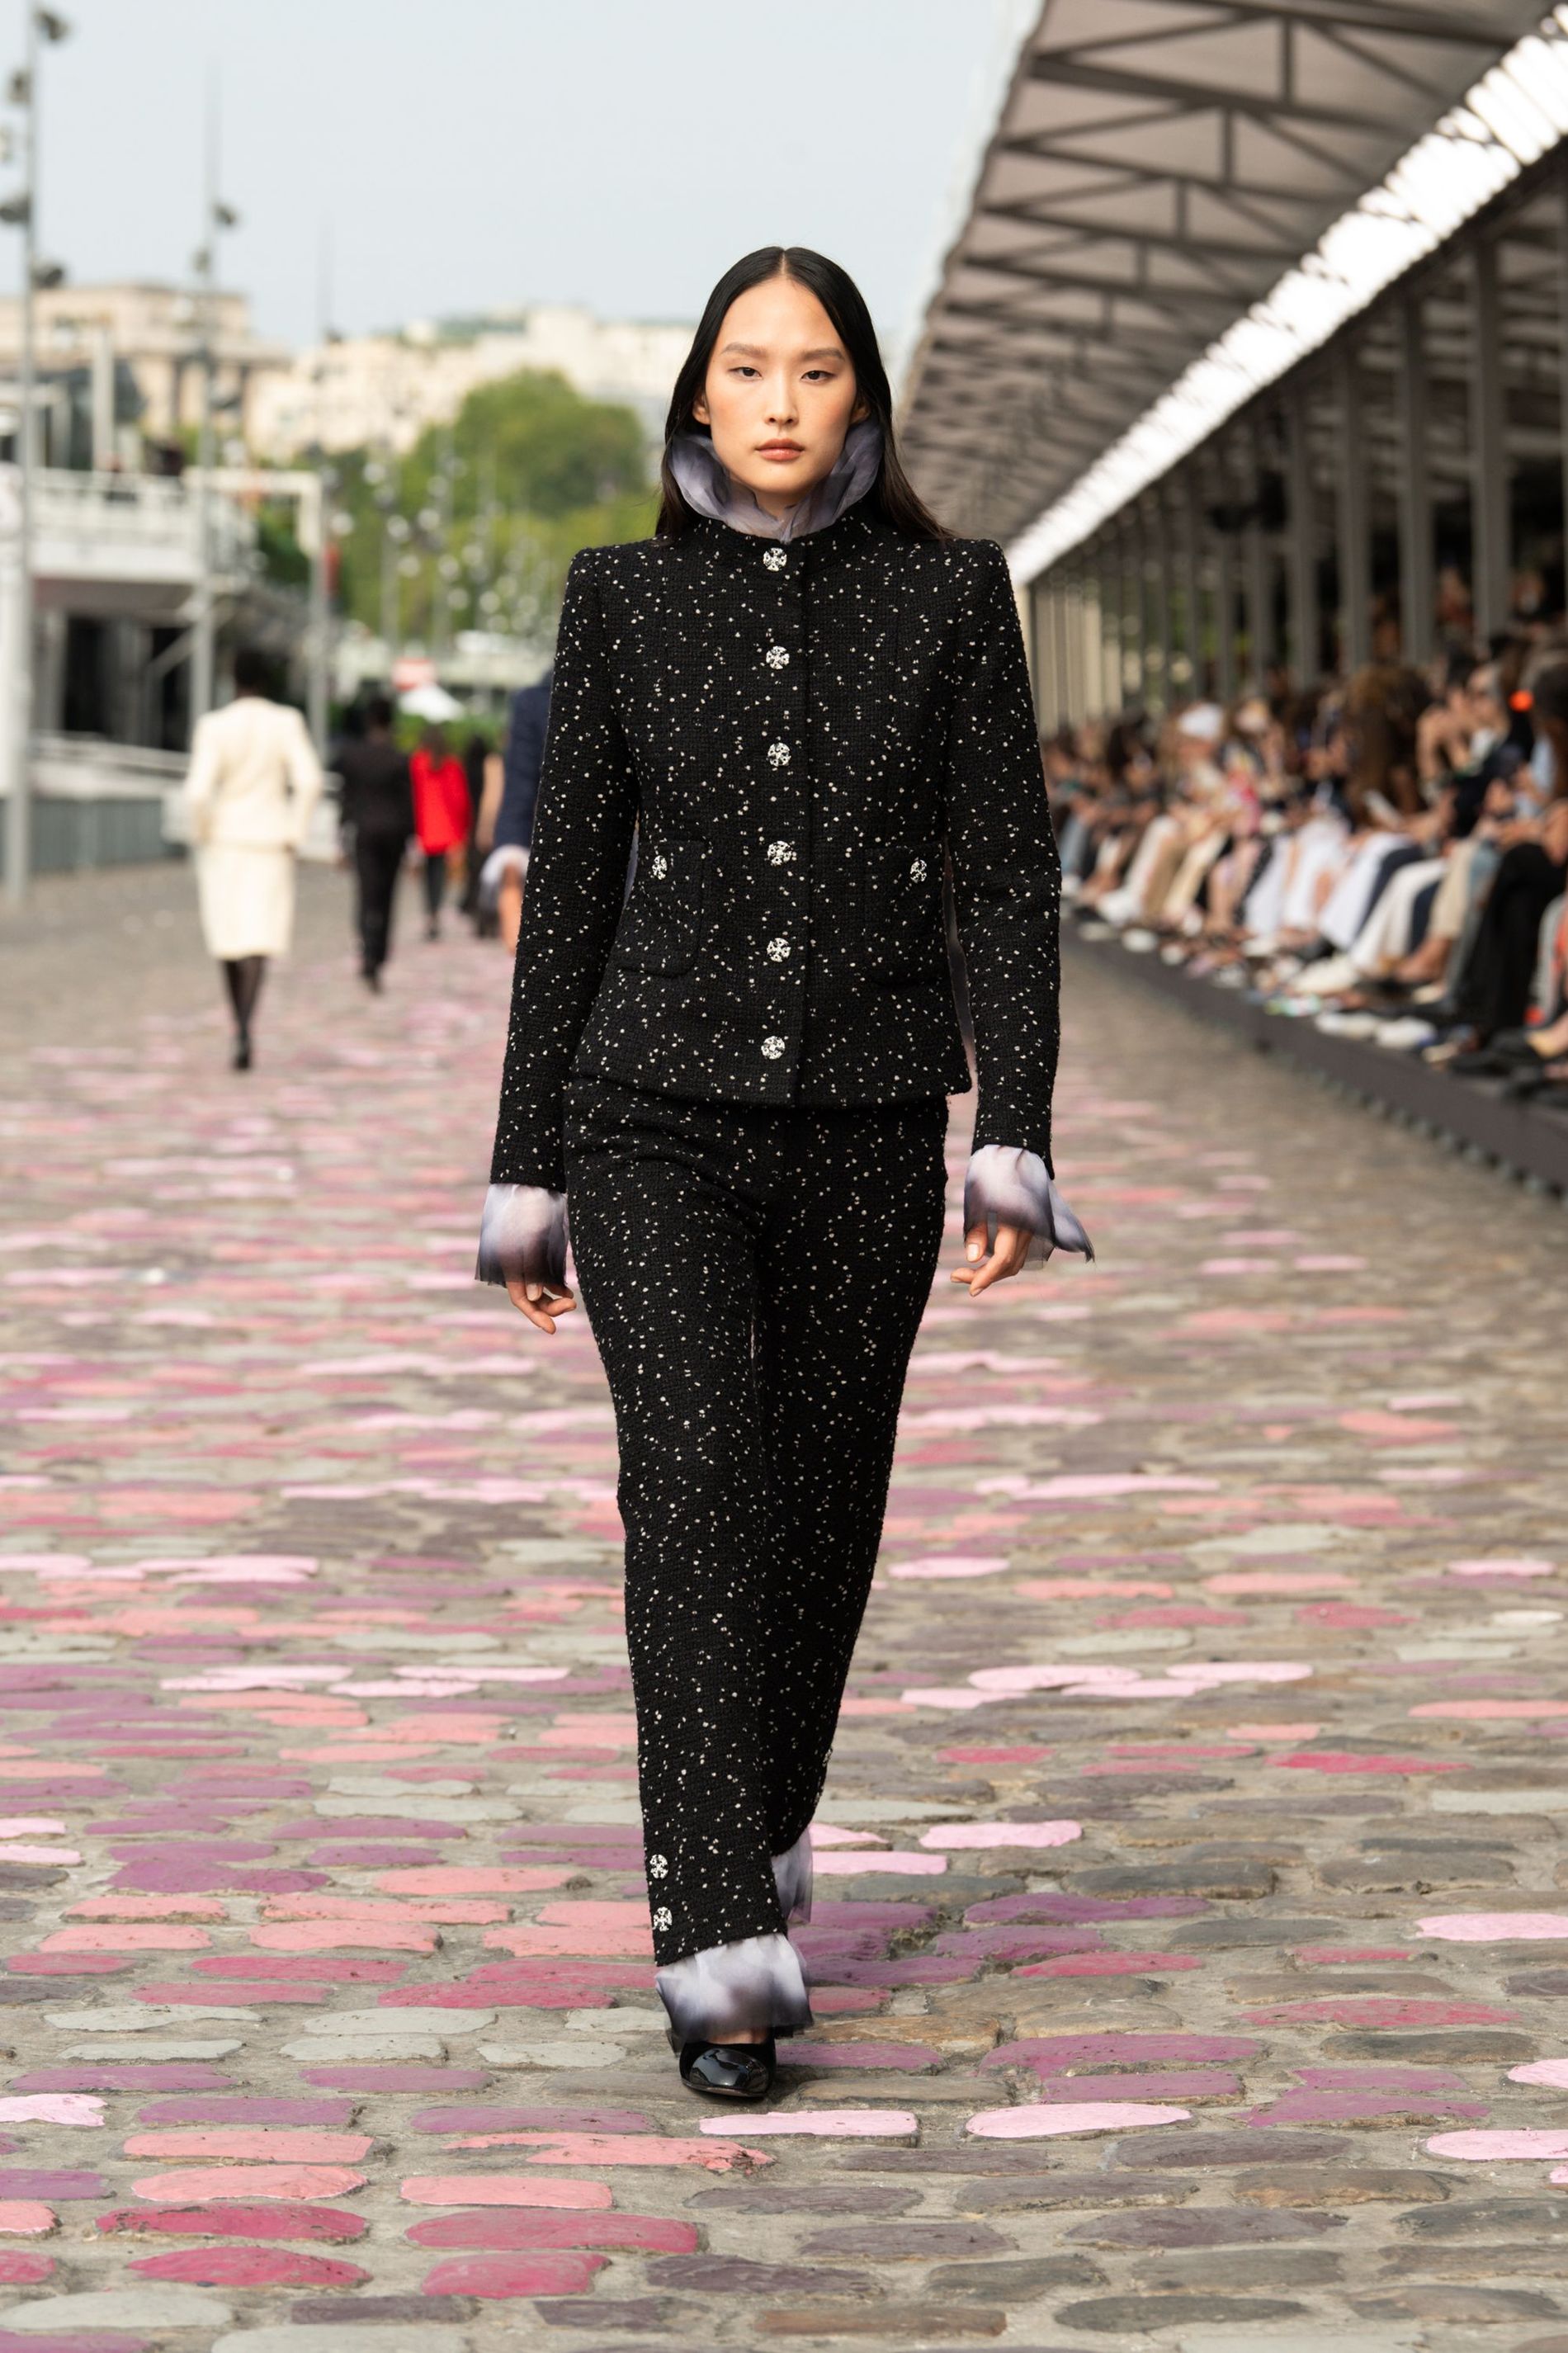 Chanel-Fall-Winter 2022/23 Haute Couture Collection